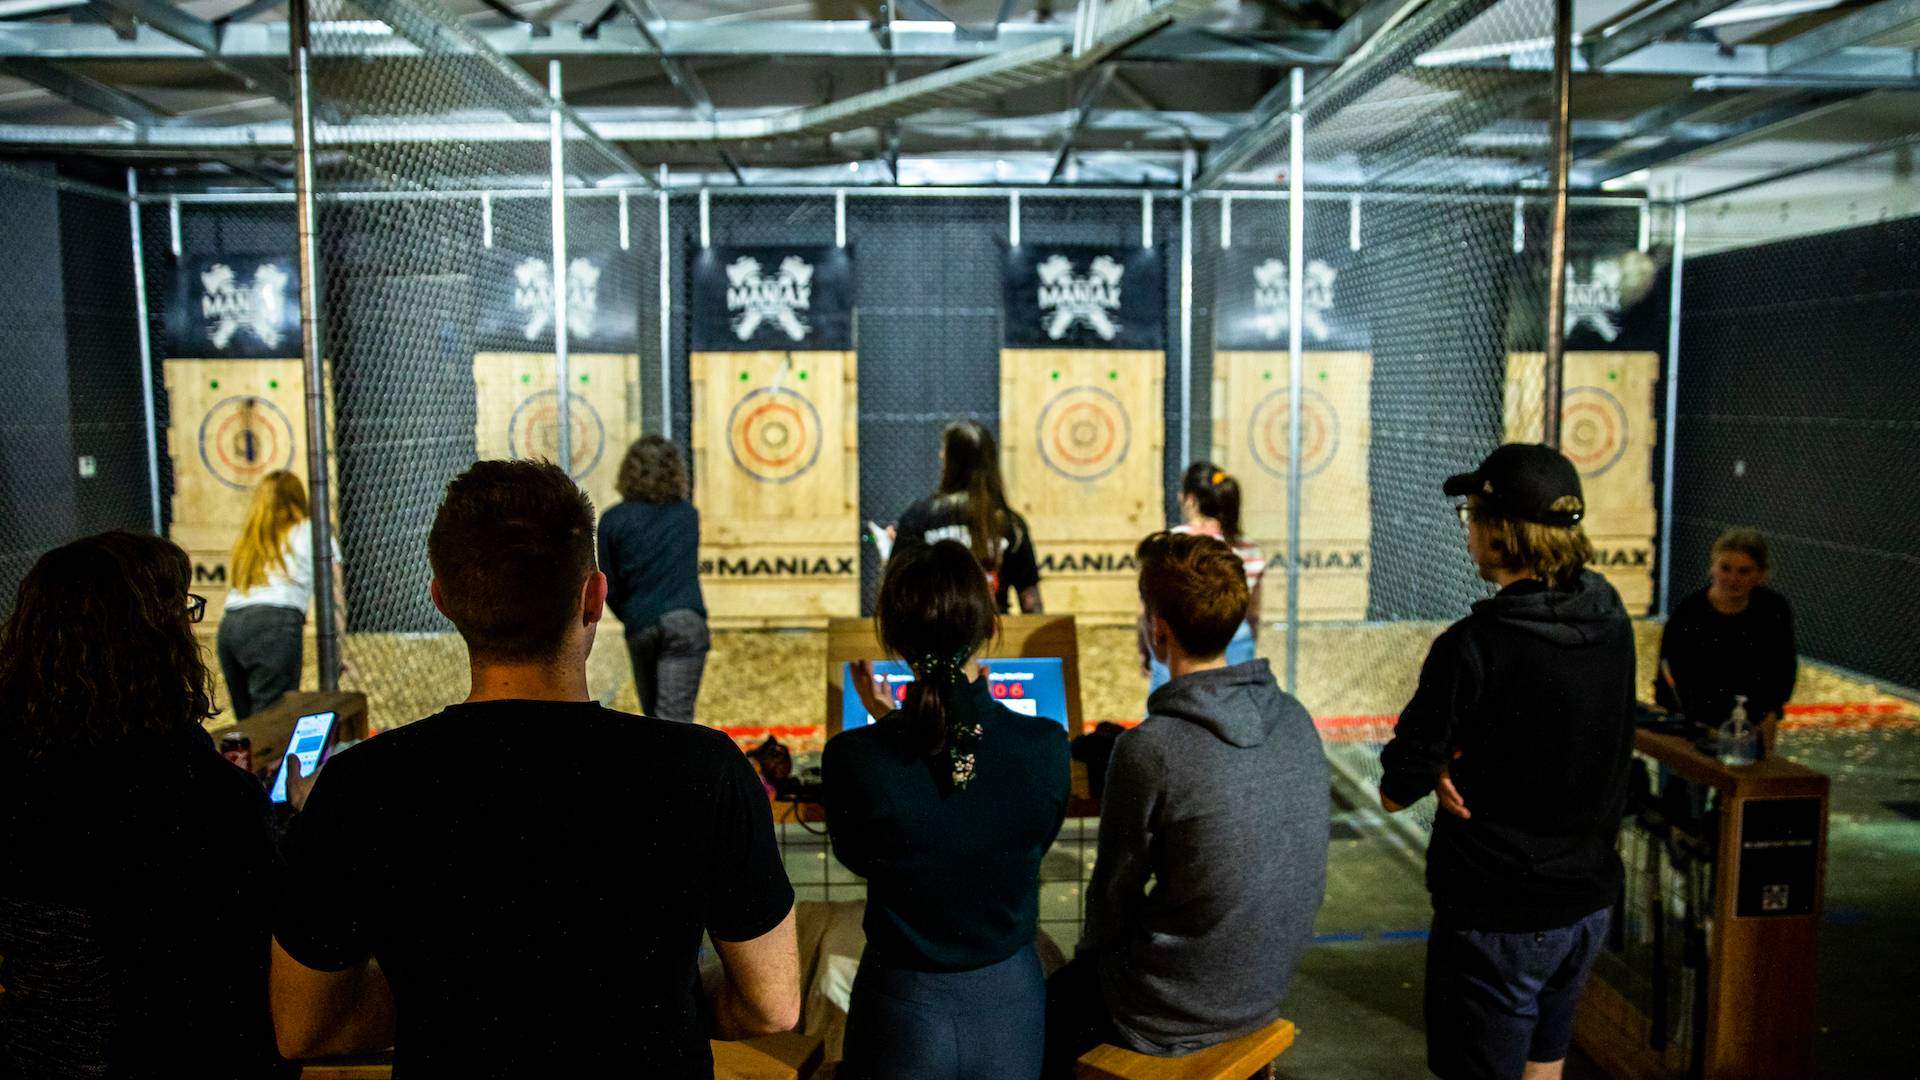 Maniax Is Opening a Second Axe-Throwing Venue in the CBD This Month